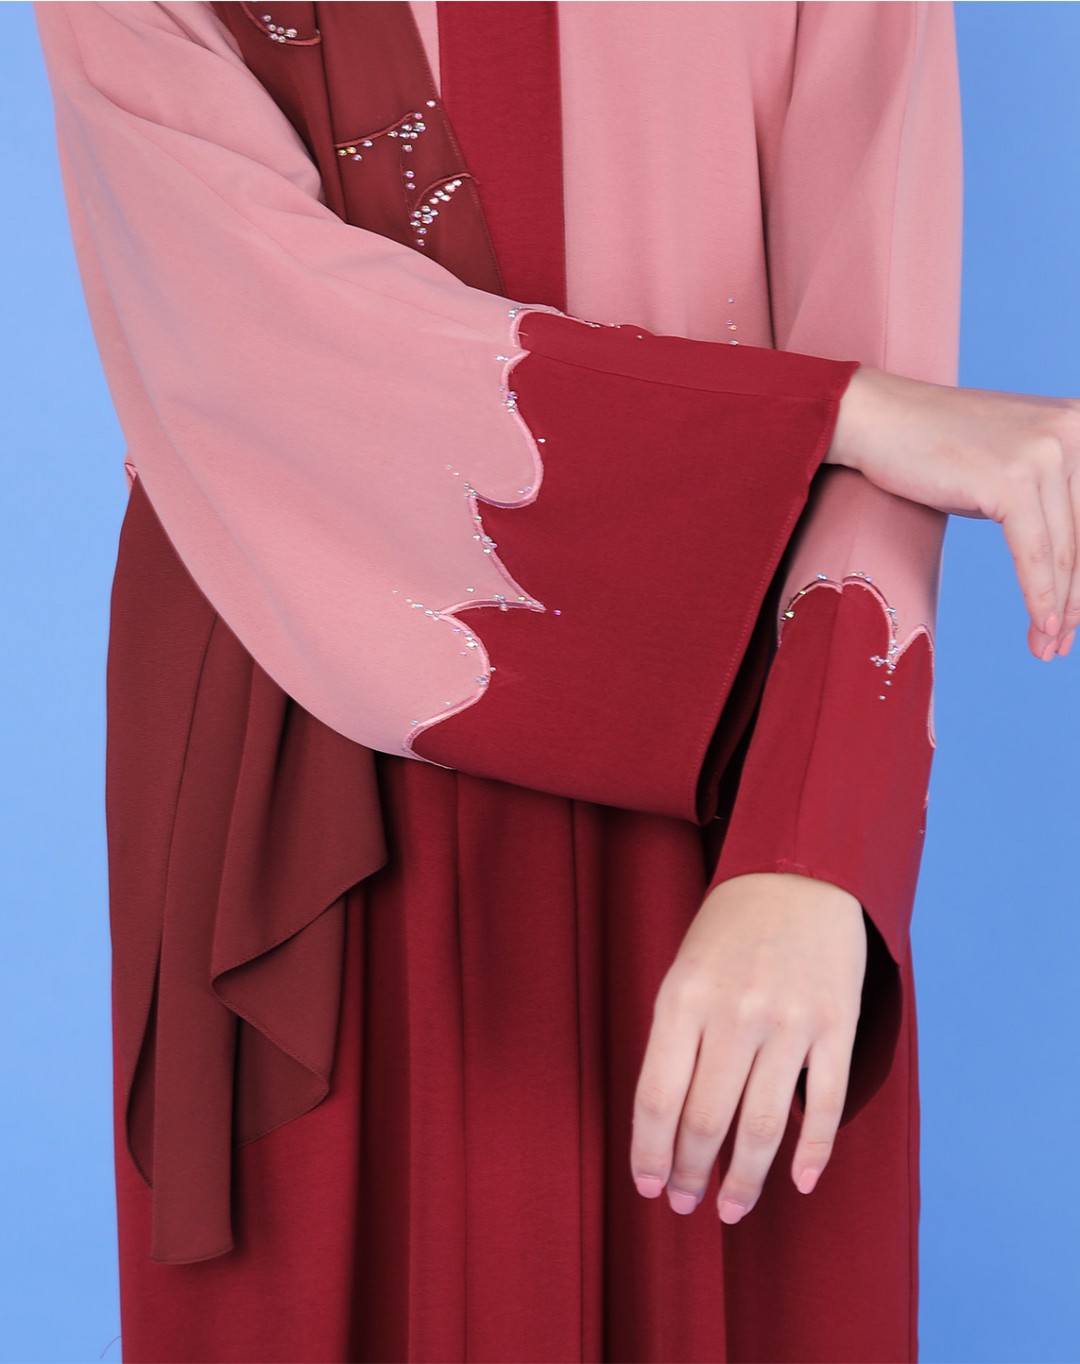 QUINCE JUBAH